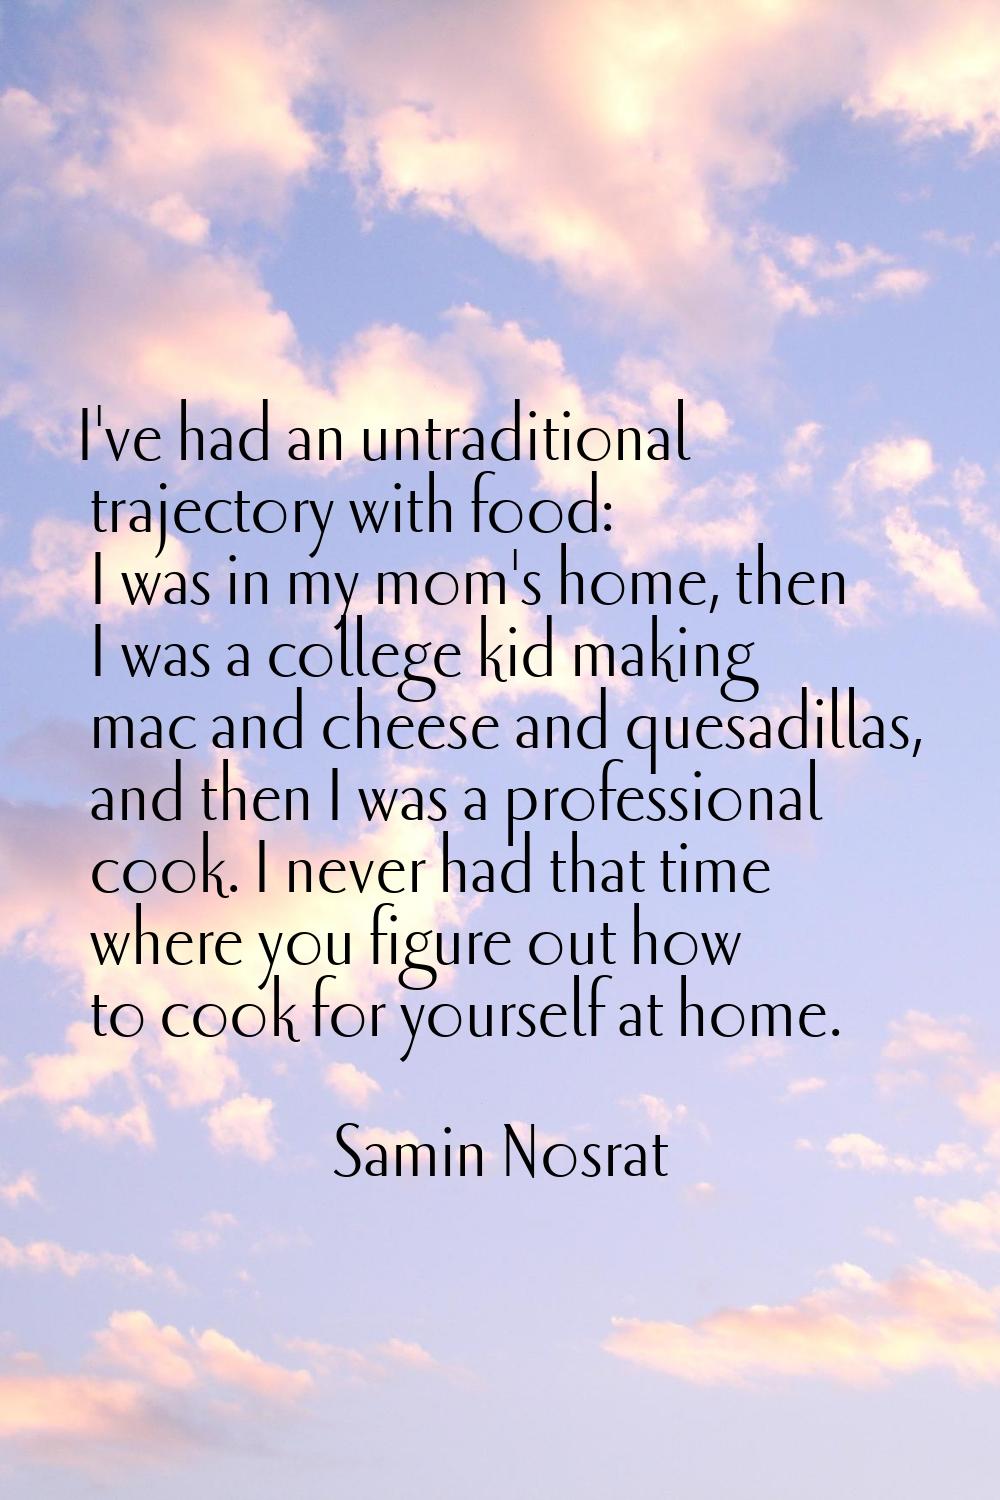 I've had an untraditional trajectory with food: I was in my mom's home, then I was a college kid ma